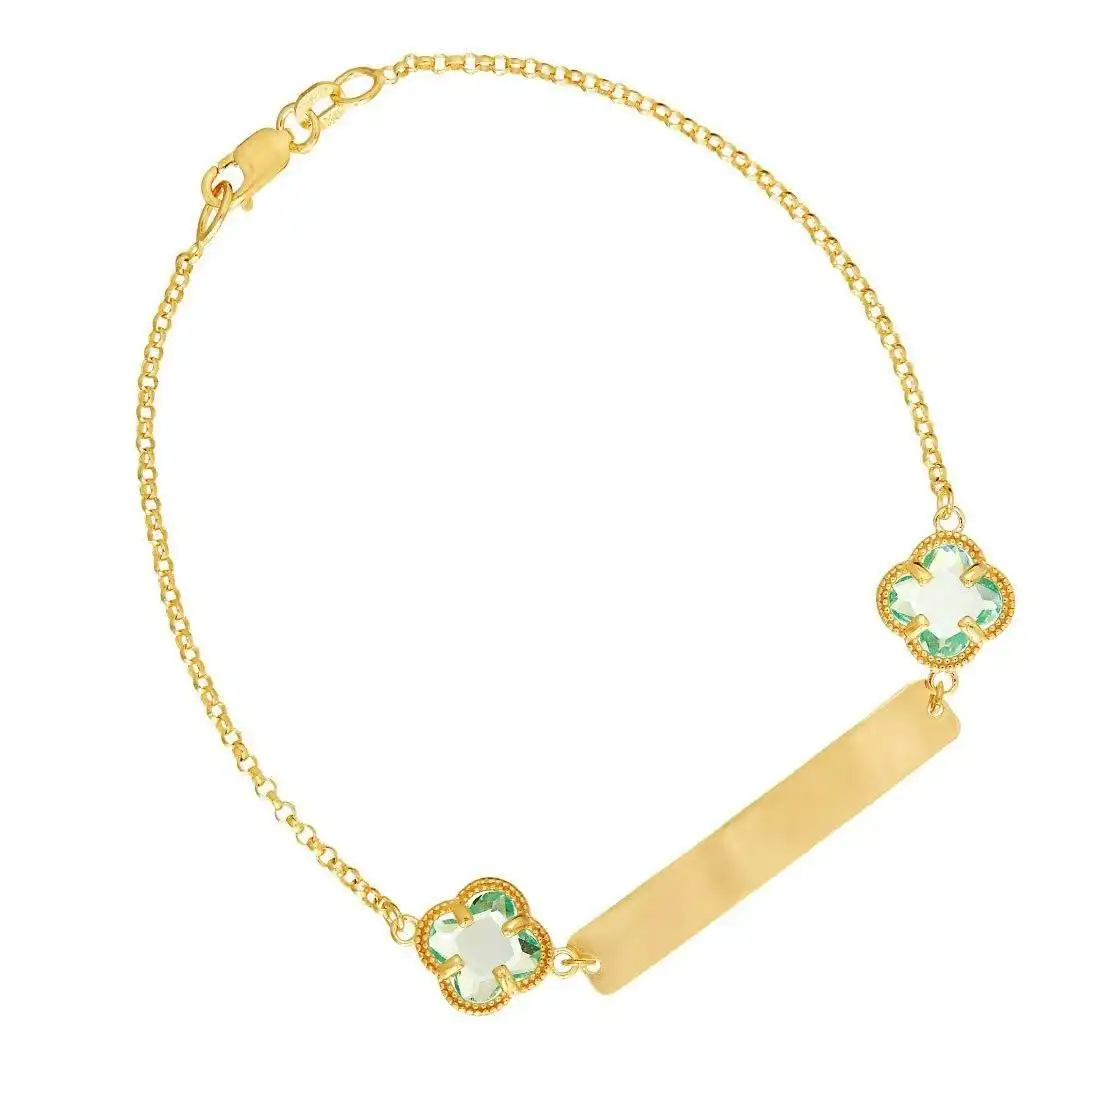 Blue 4 Leaf Clover ID Bracelet in 9ct Yellow Gold Silver Infused